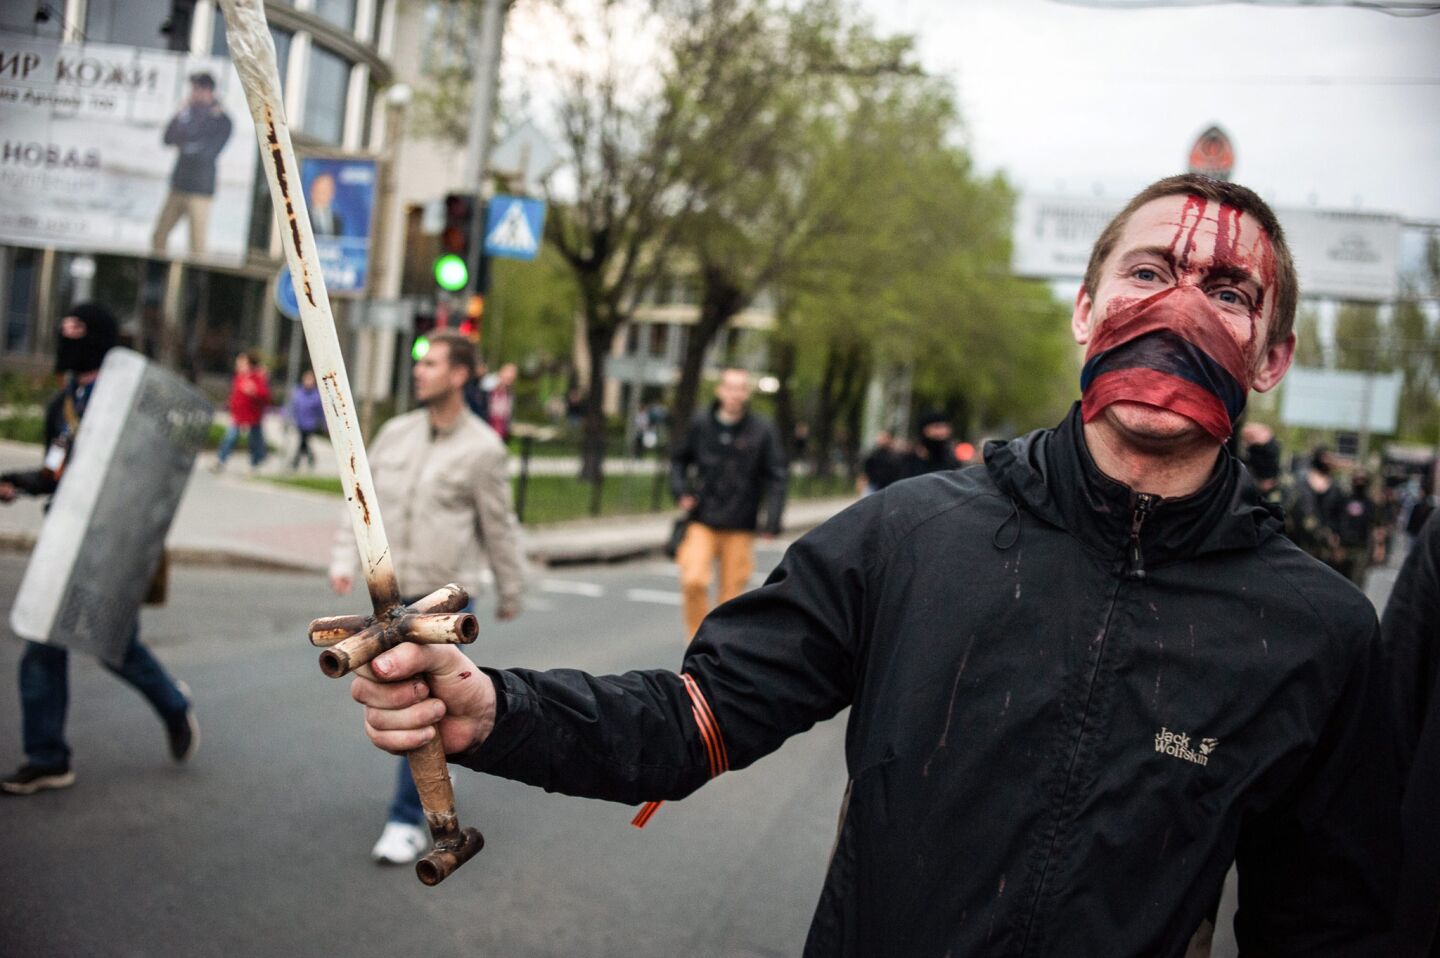 Pro-Russian protesters attack pro-Ukrainian supporters during their rally in Donetsk, Ukraine.